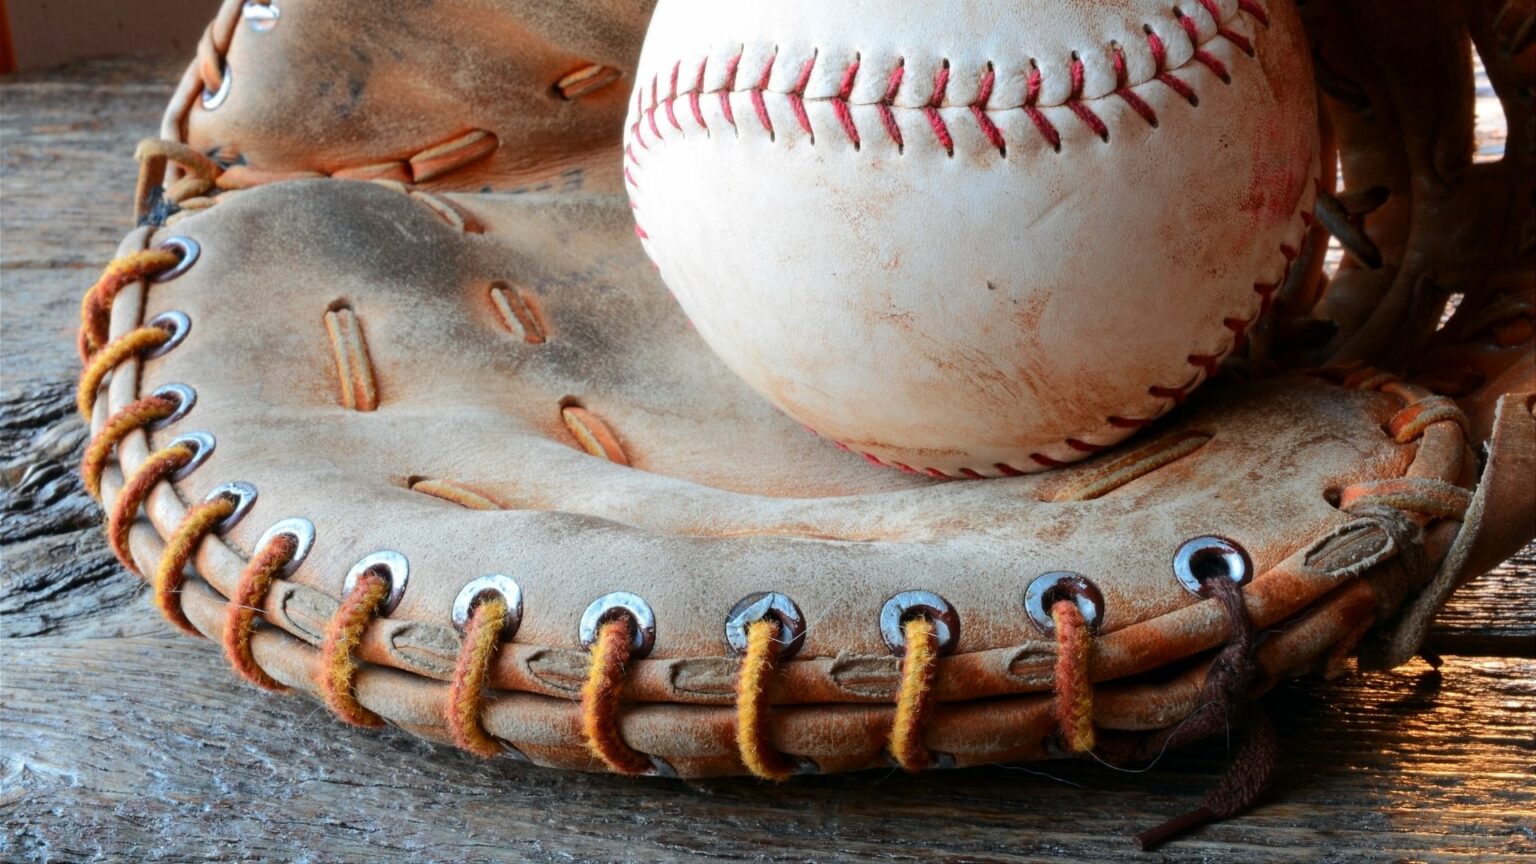 How To Clean Your Baseball Glove